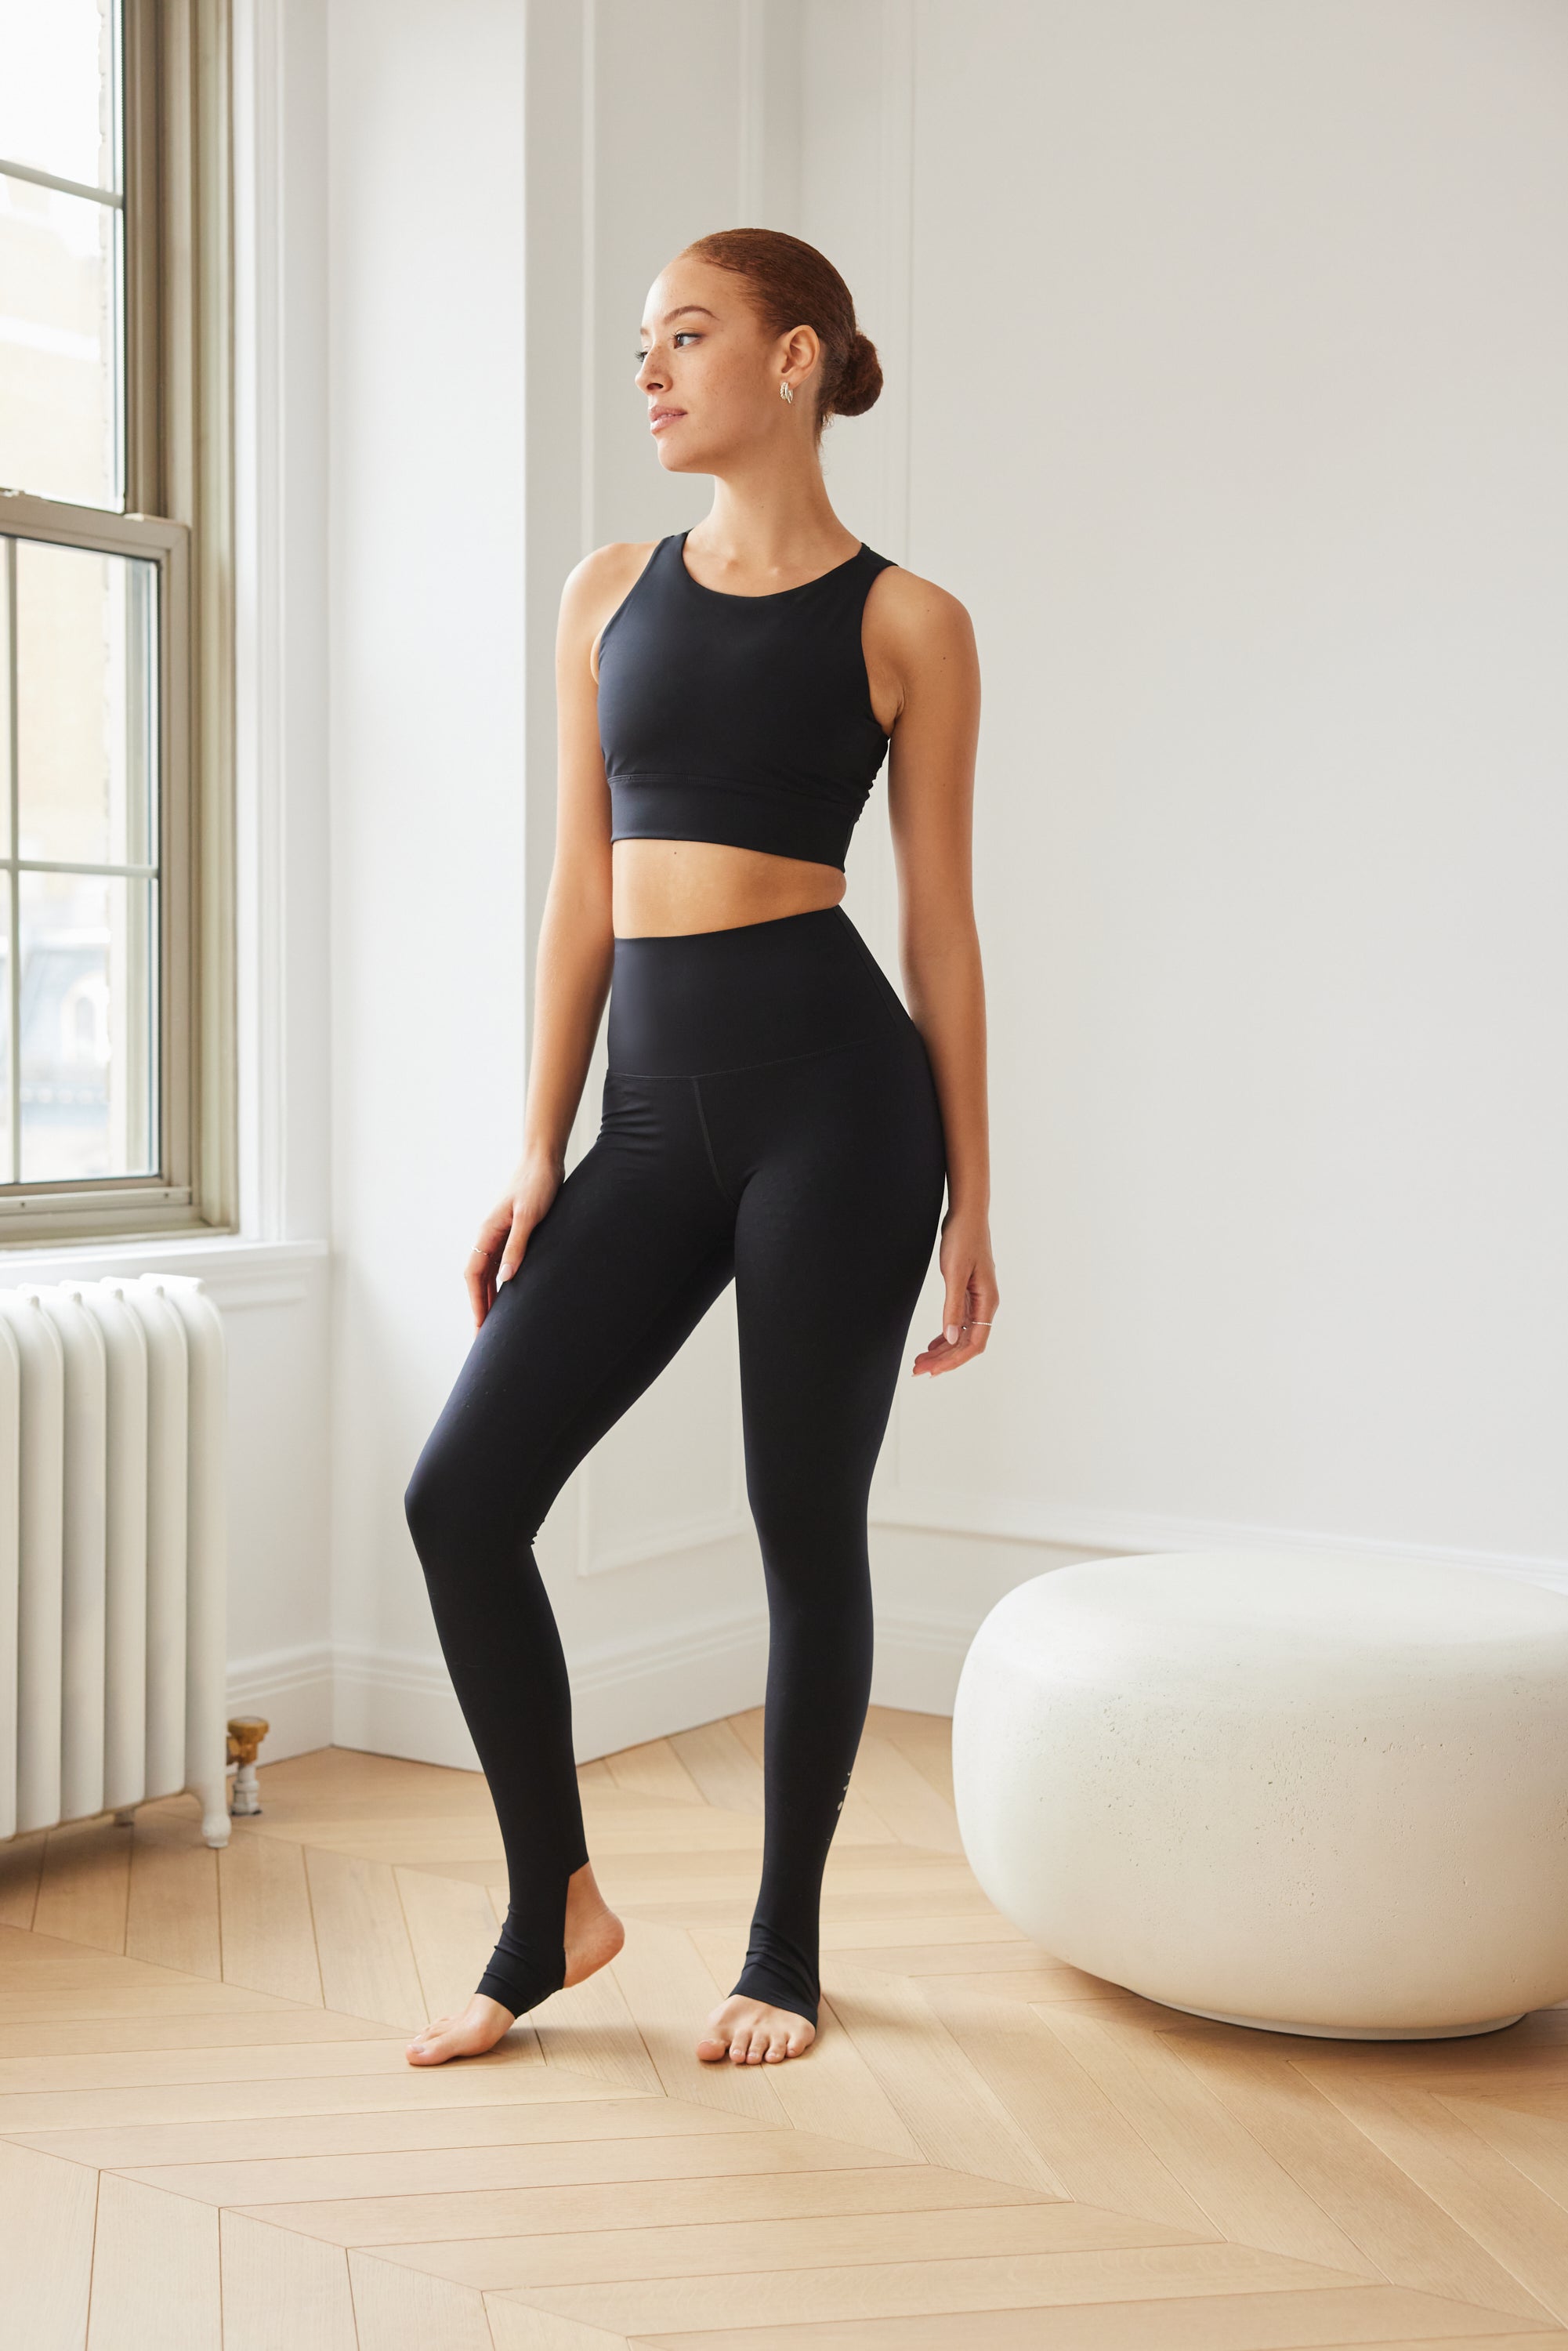 Elastique Athletics - L'Original Leggings - Our signature MicroPerle  Compression technology with micro-massaging beads that stimulate lymphatic  flow and boost circulation. Consider it a wearable massage, perfect for  cycling!